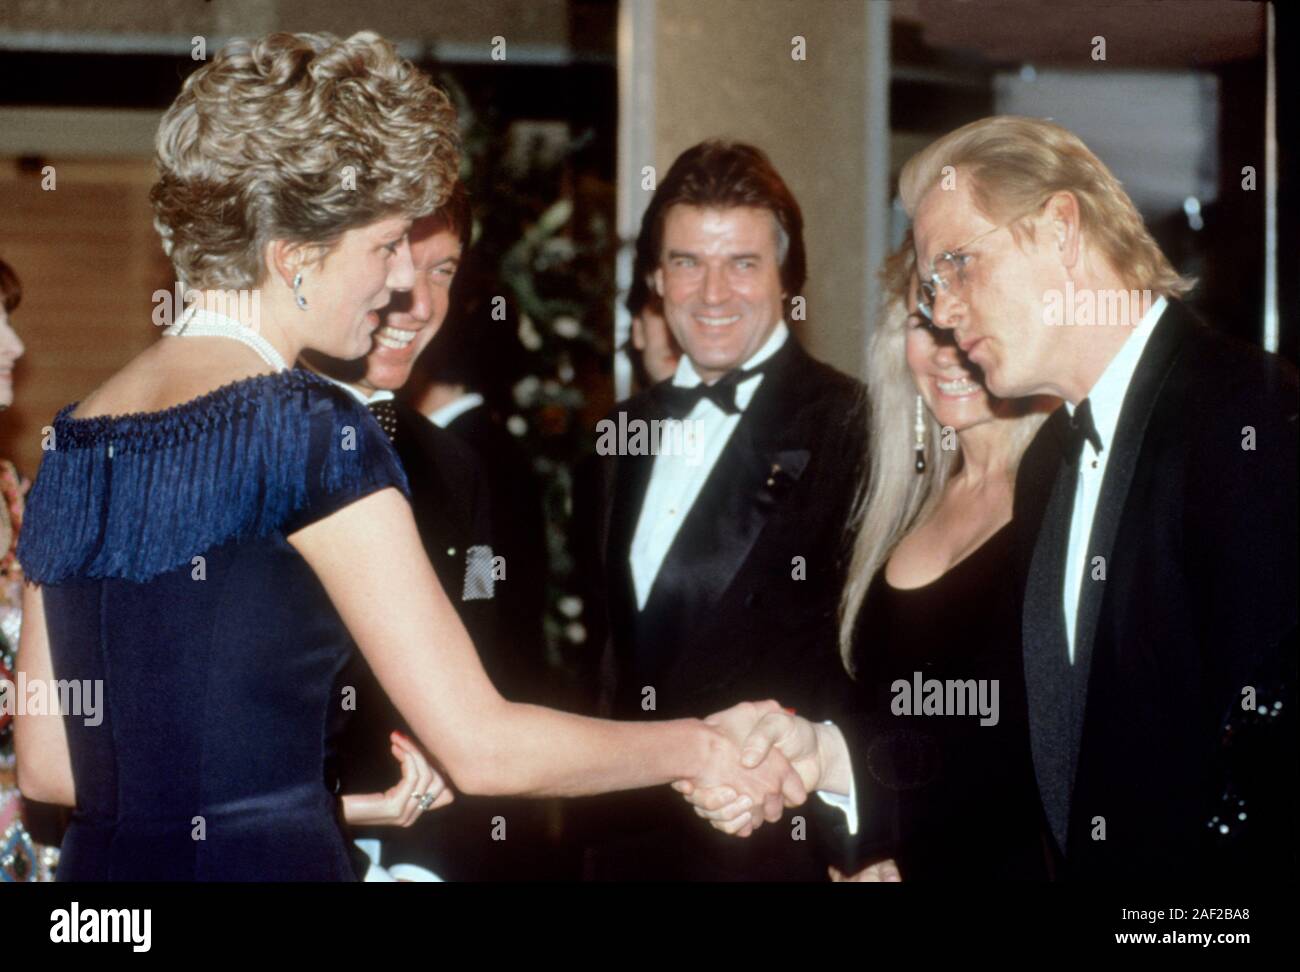 Barbra Streisand and Nick Nolte meet HRH Princess Diana at the European movie premiere of The Prince of Tides, London, England 1991. Stock Photo